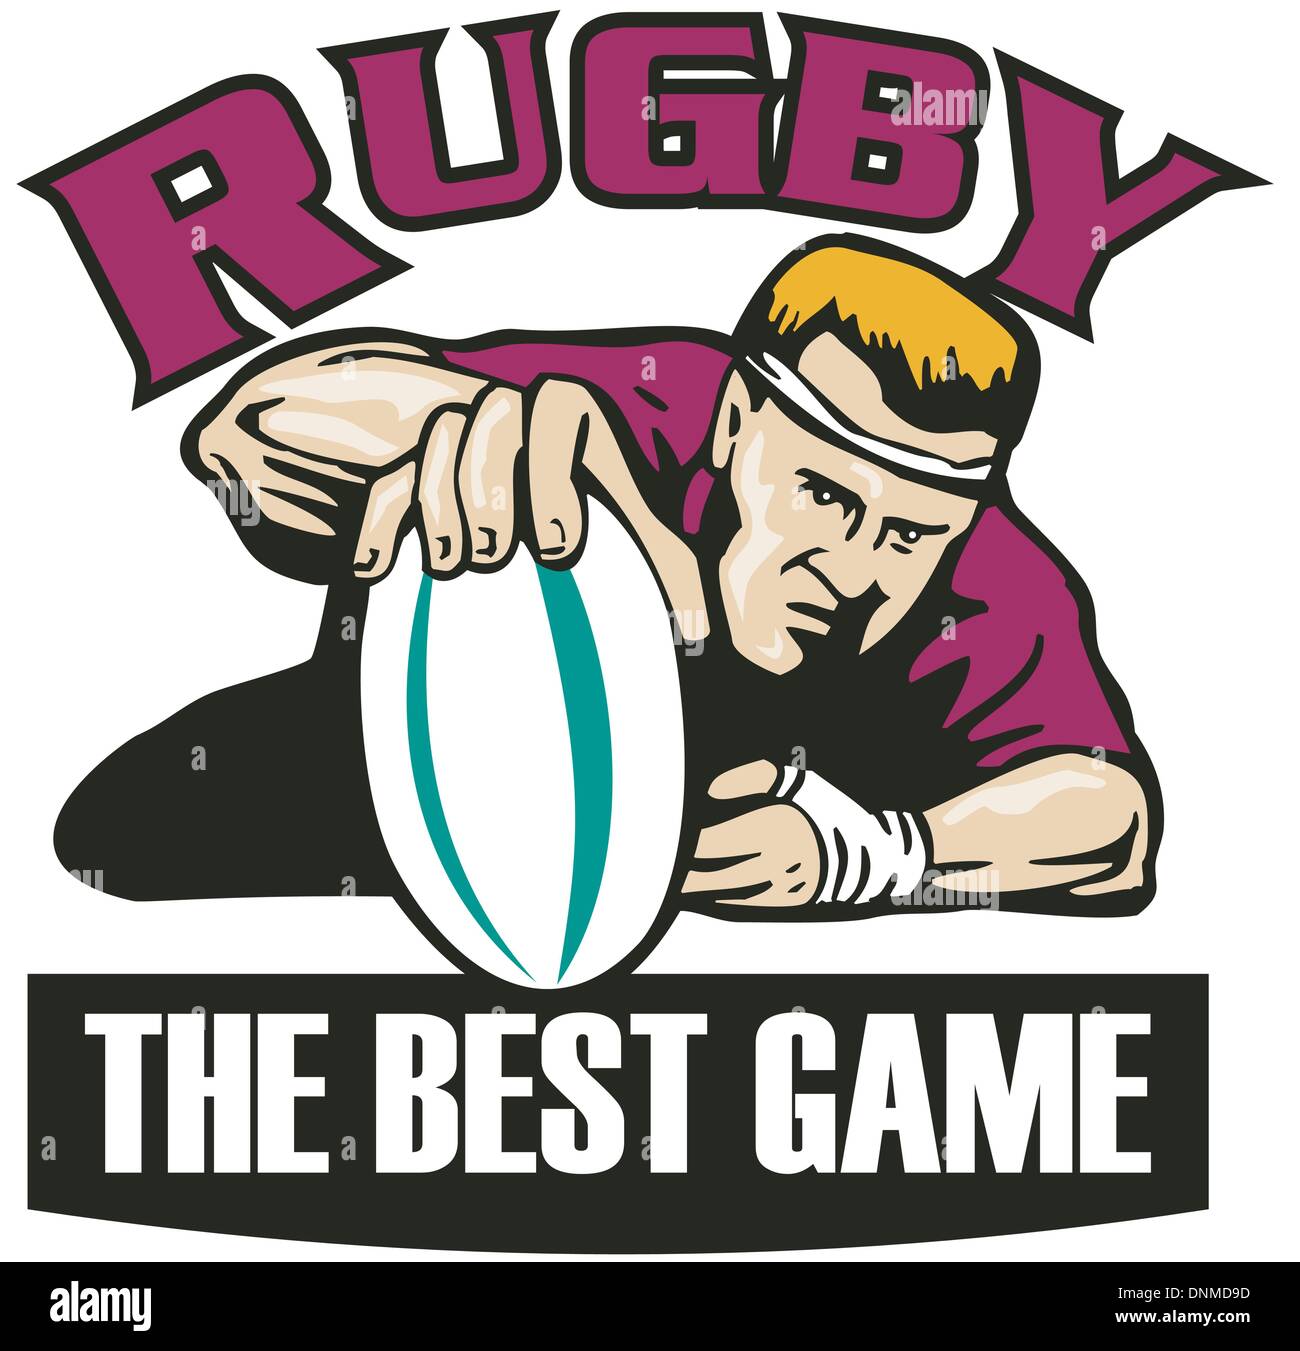 retro style illustration of a rugby player grounding the ball for a try viewed from the front with words 'rugby the best game' Stock Vector